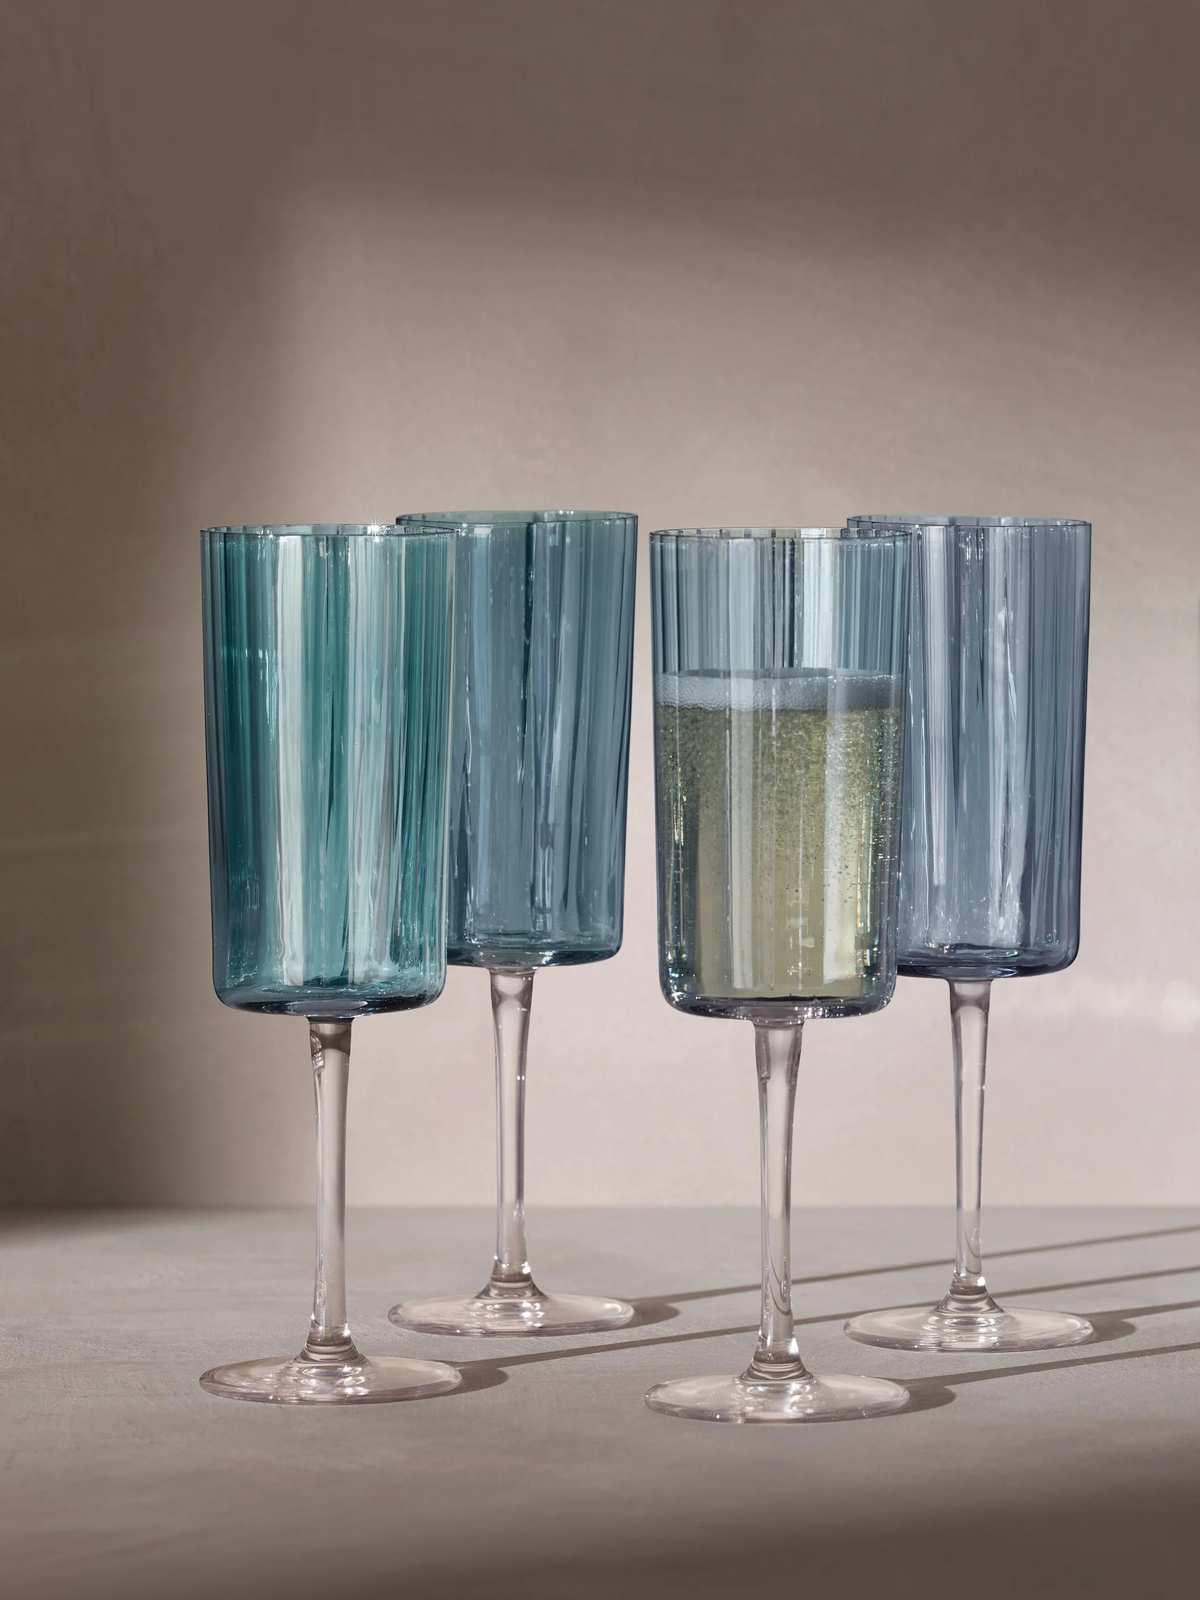 bEST CHAMPAGNE FLUTES - Elevating Elegance: The Art of Decorative Elements and Finishes in Champagne Flutes